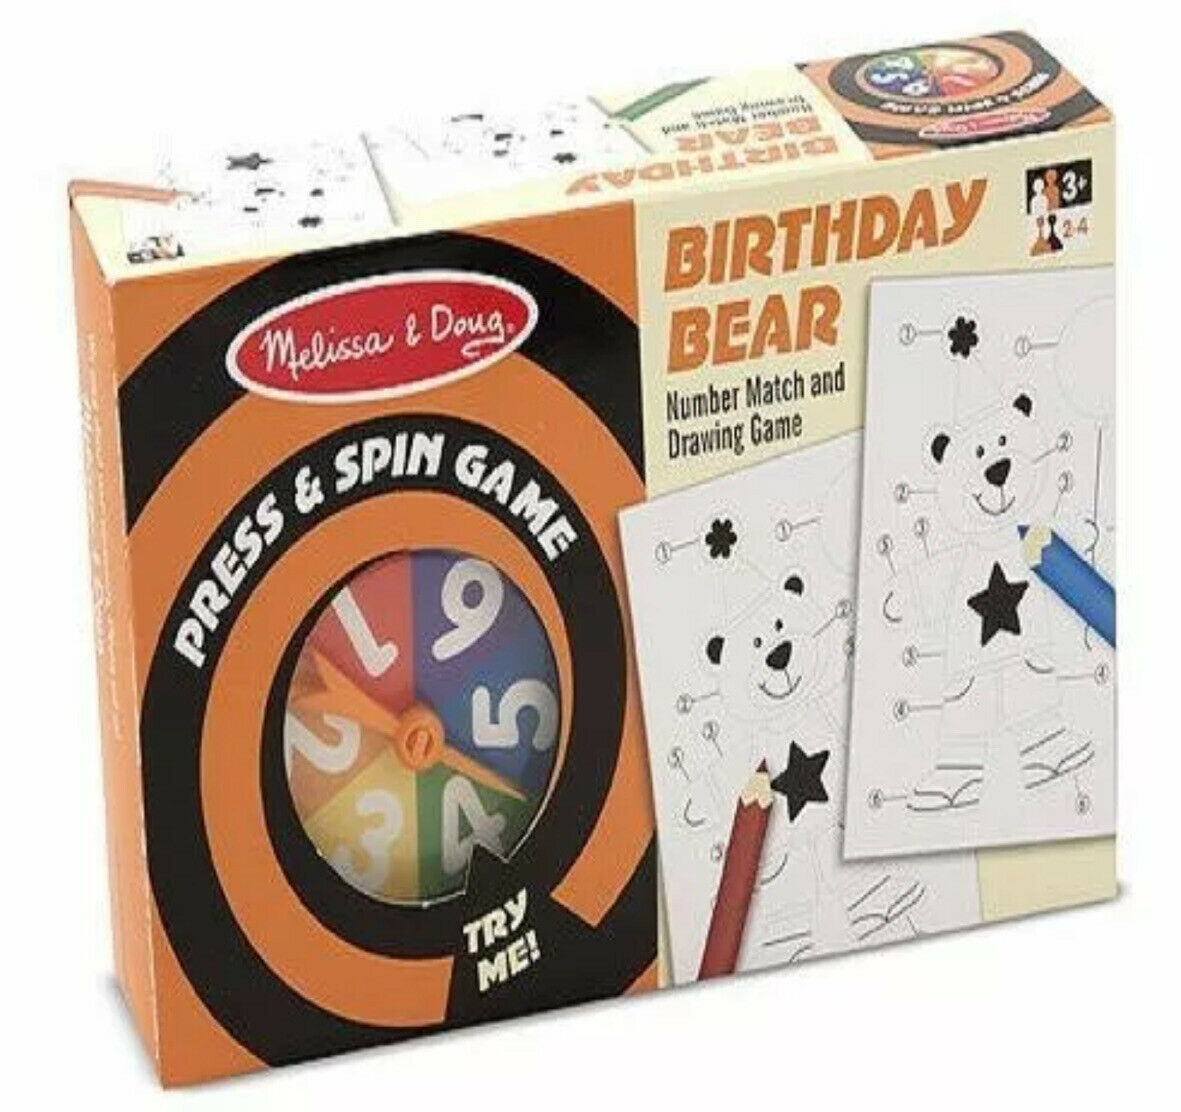 Melissa and Doug Press and Spin Birthday Bear Game Item # 4511 Ages 3+